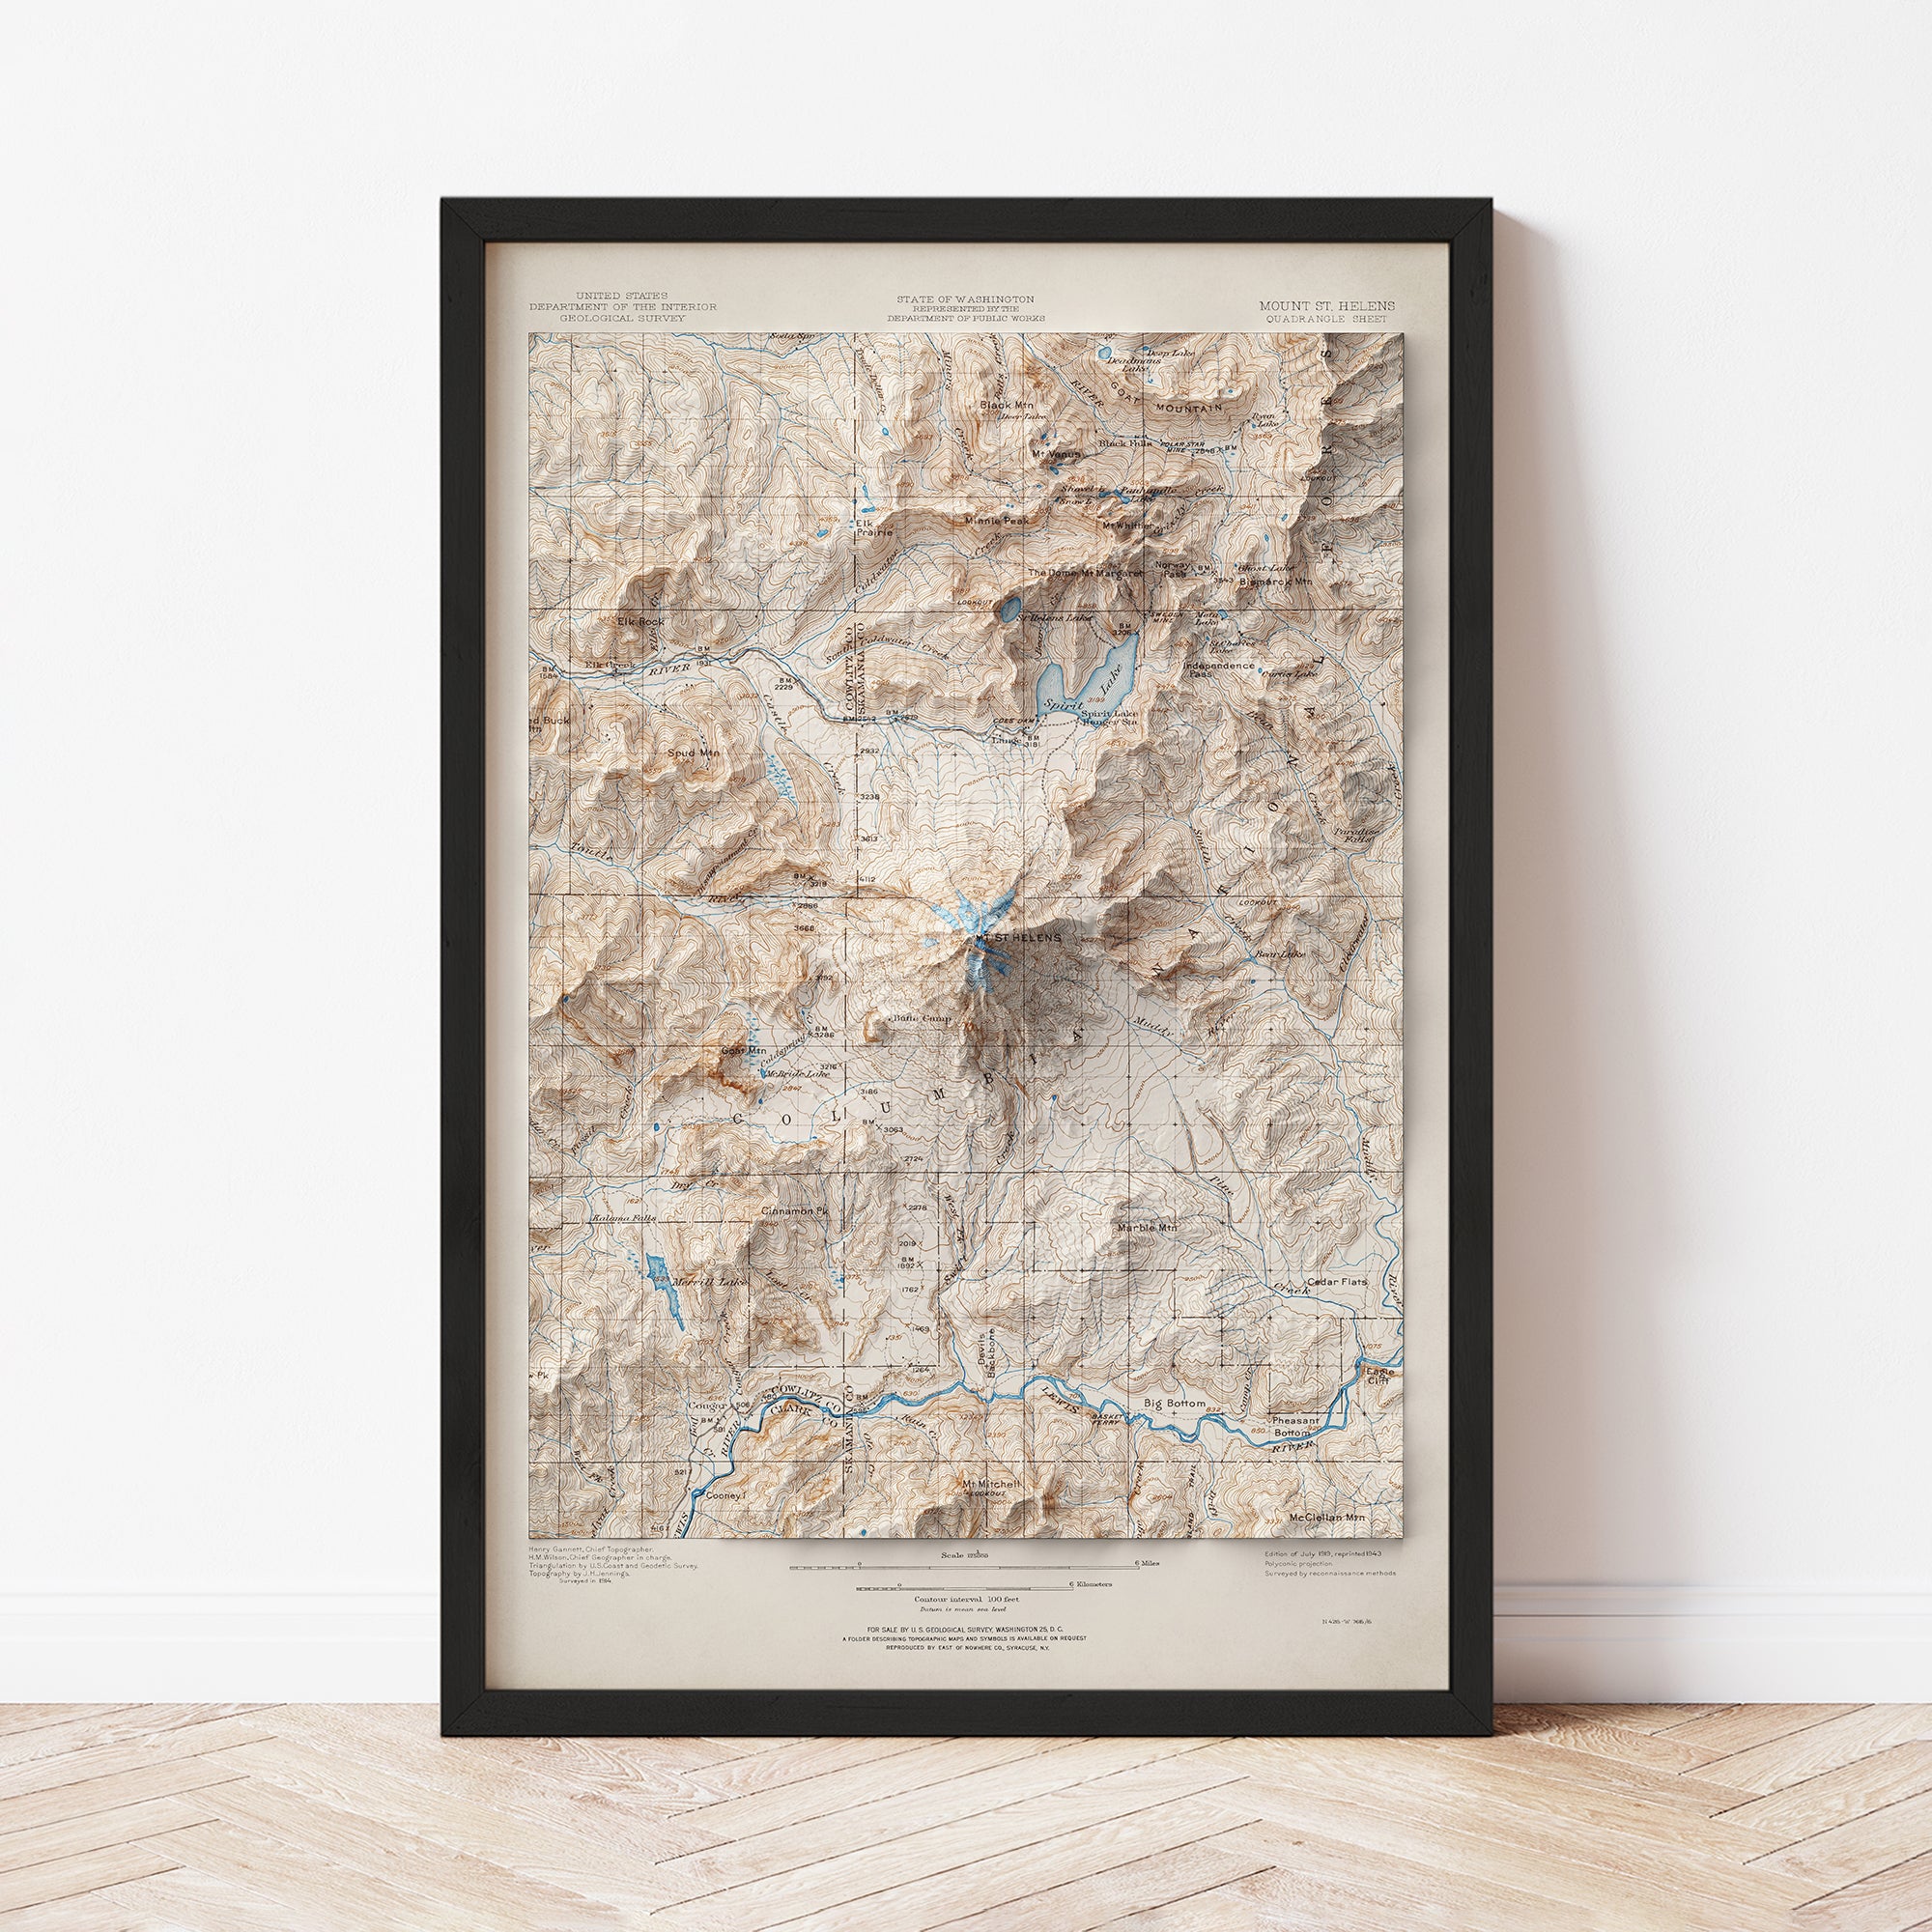 Mount St. Helens, WA - Vintage Shaded Relief Map (1919)